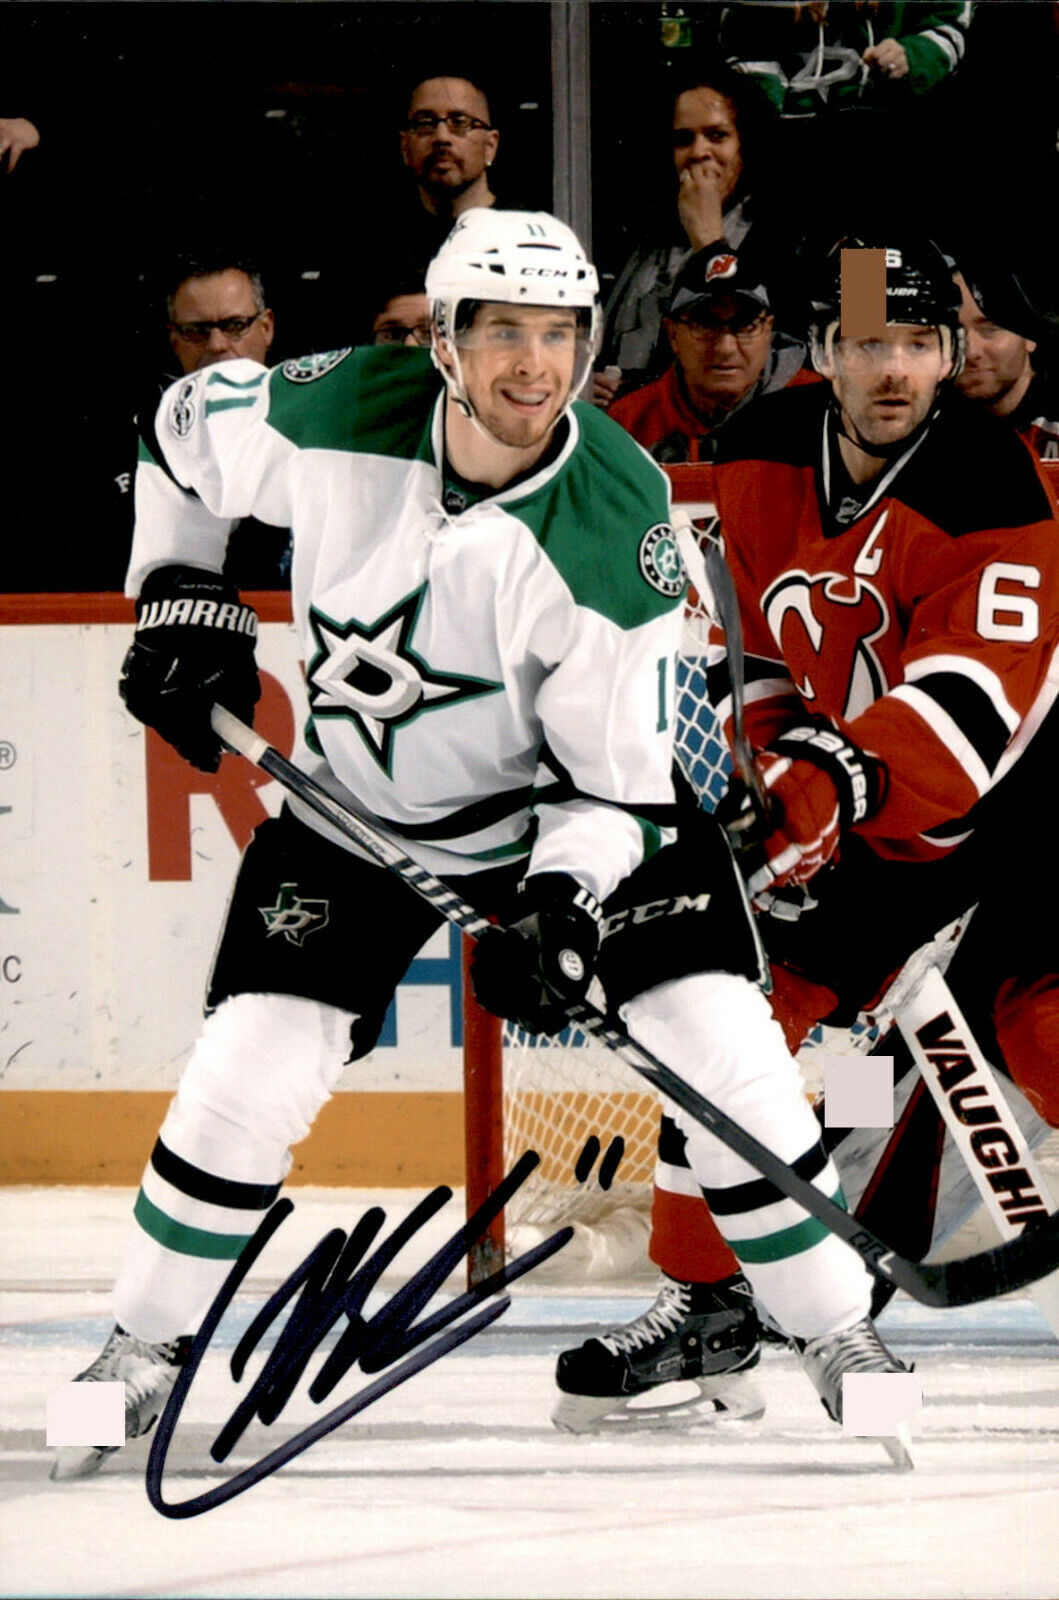 Curtis McKenzie SIGNED 4x6 Photo Poster painting DALLAS STARS #3